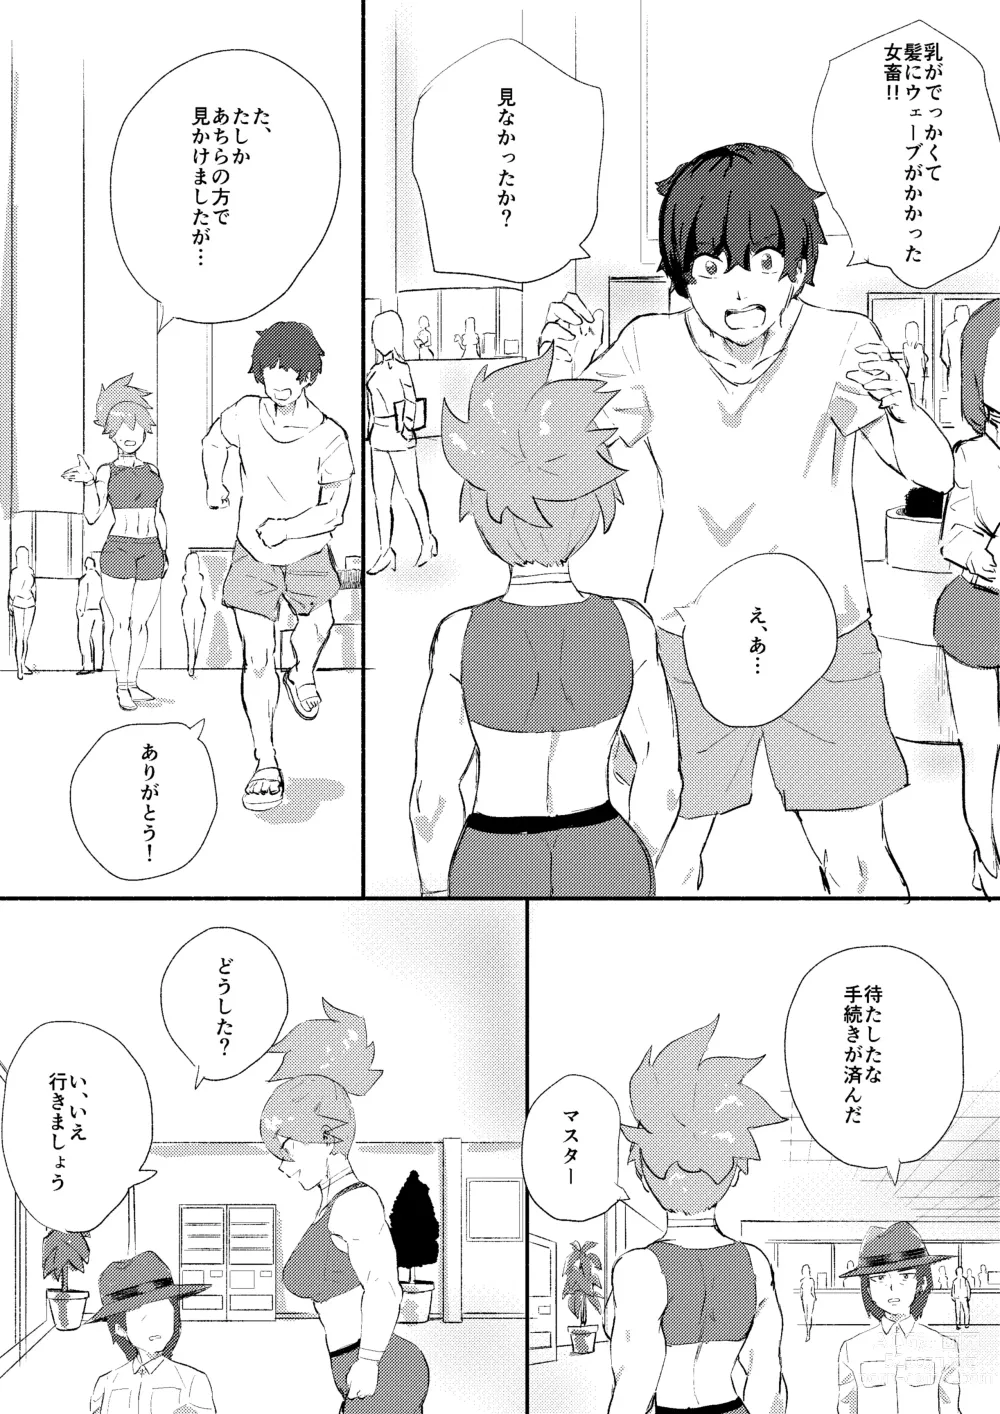 Page 15 of doujinshi Red Tag Episode 10